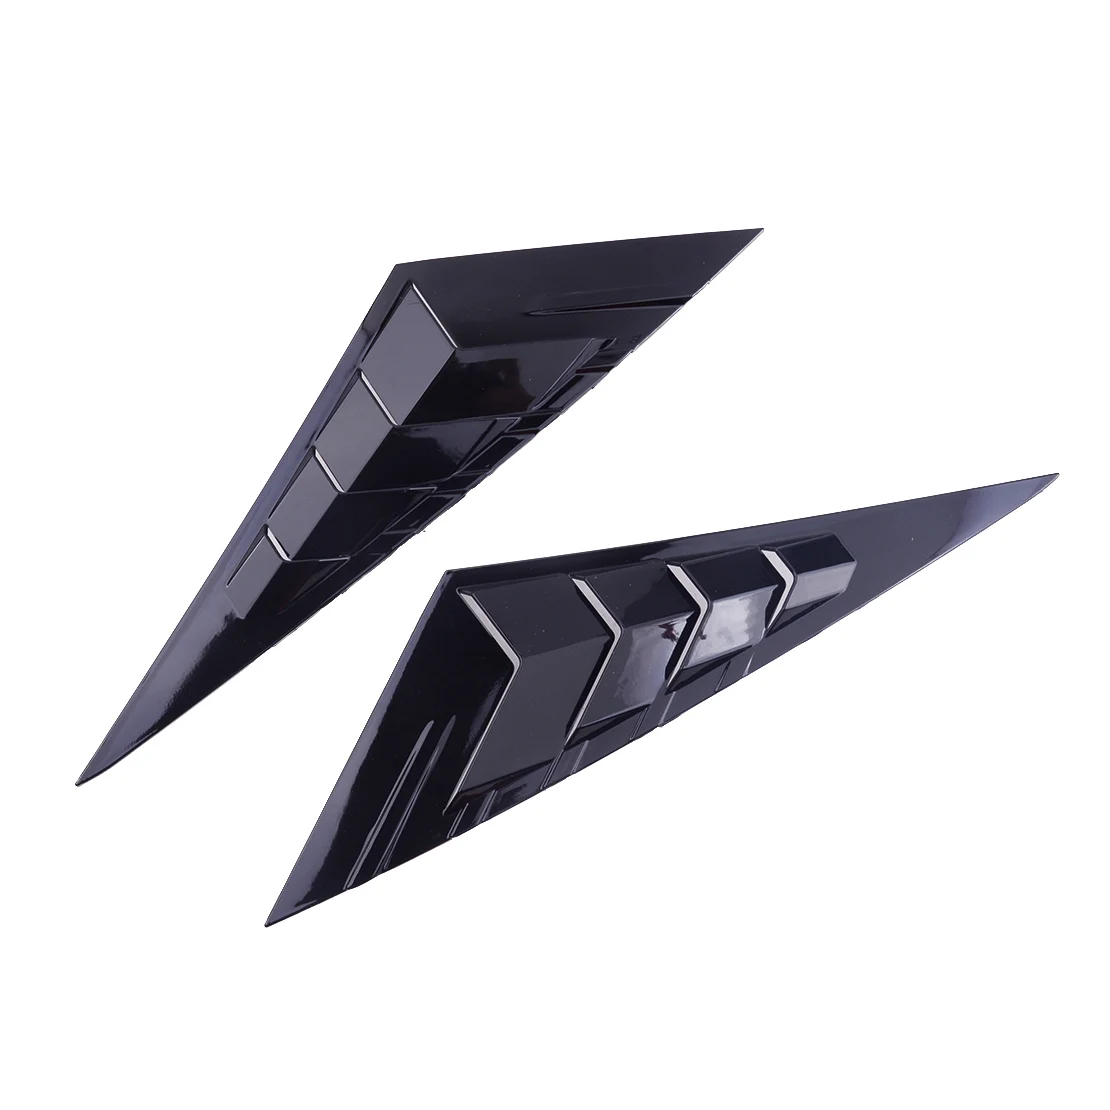 

2pcs Car Glossy Black ABS Plastic Side Vent Window Scoop Louver Cover Trim Fit For Hyundai Elantra 2021 Accessories